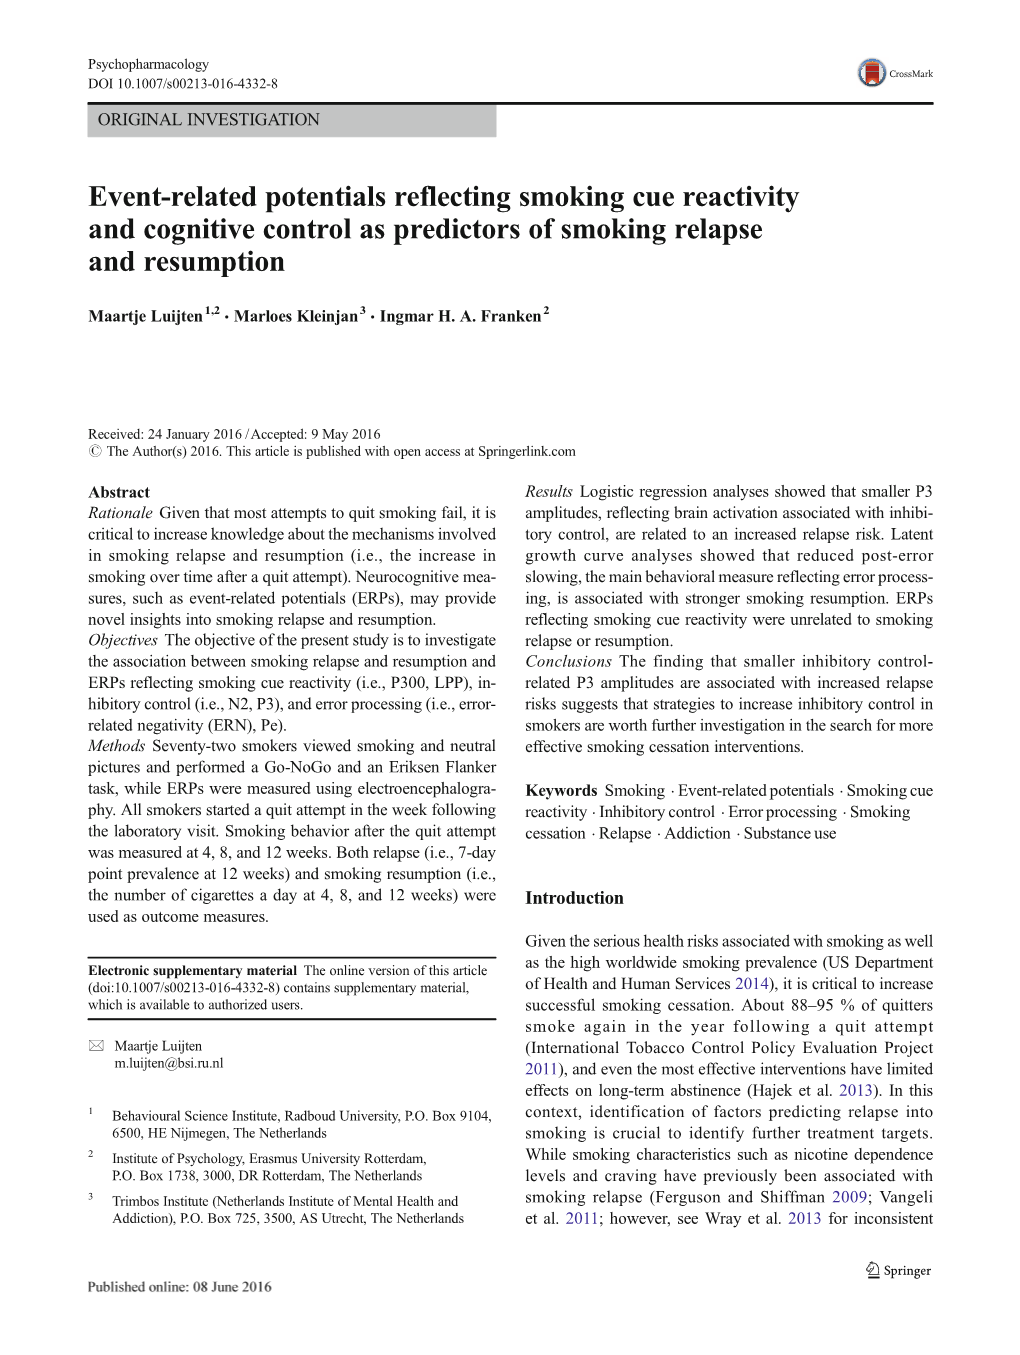 Event-Related Potentials Reflecting Smoking Cue Reactivity and Cognitive Control As Predictors of Smoking Relapse and Resumption